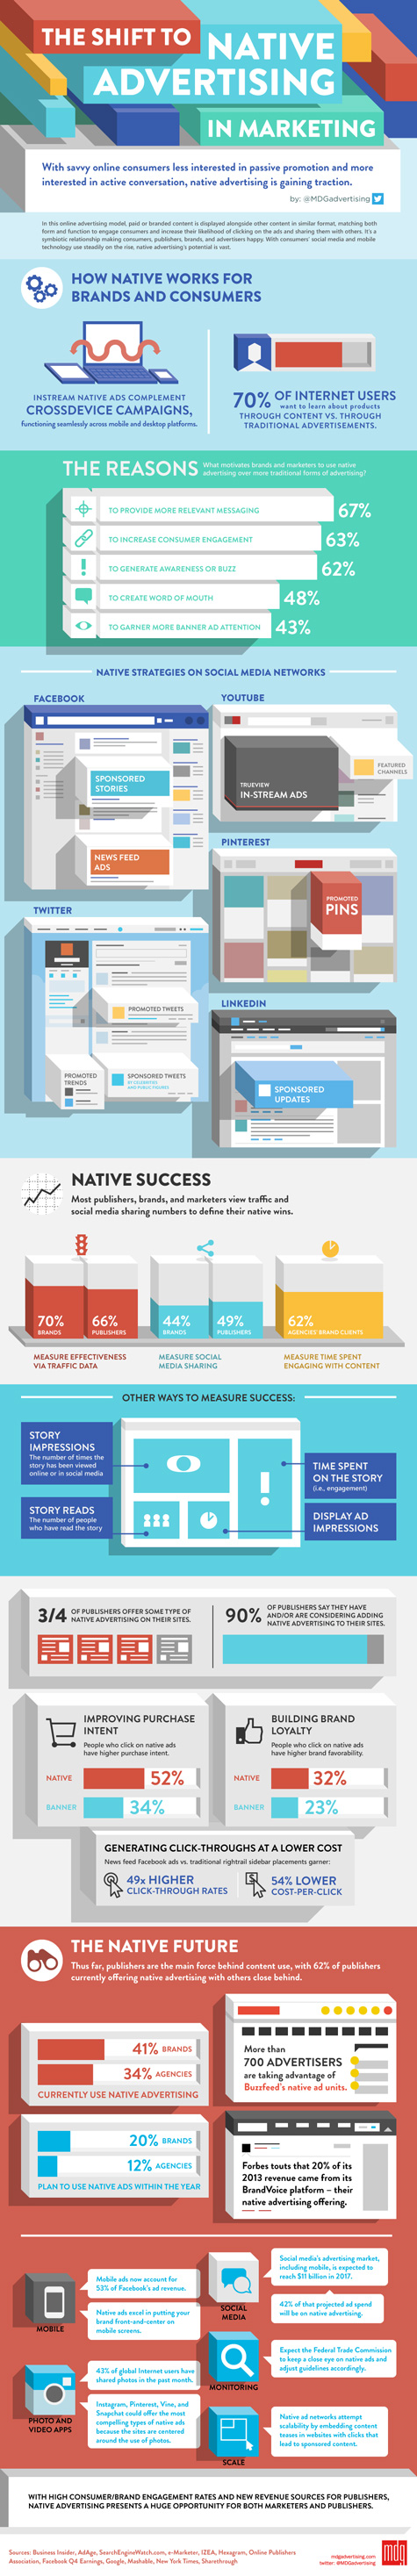 the shift to native advertising in marketing infographic 475